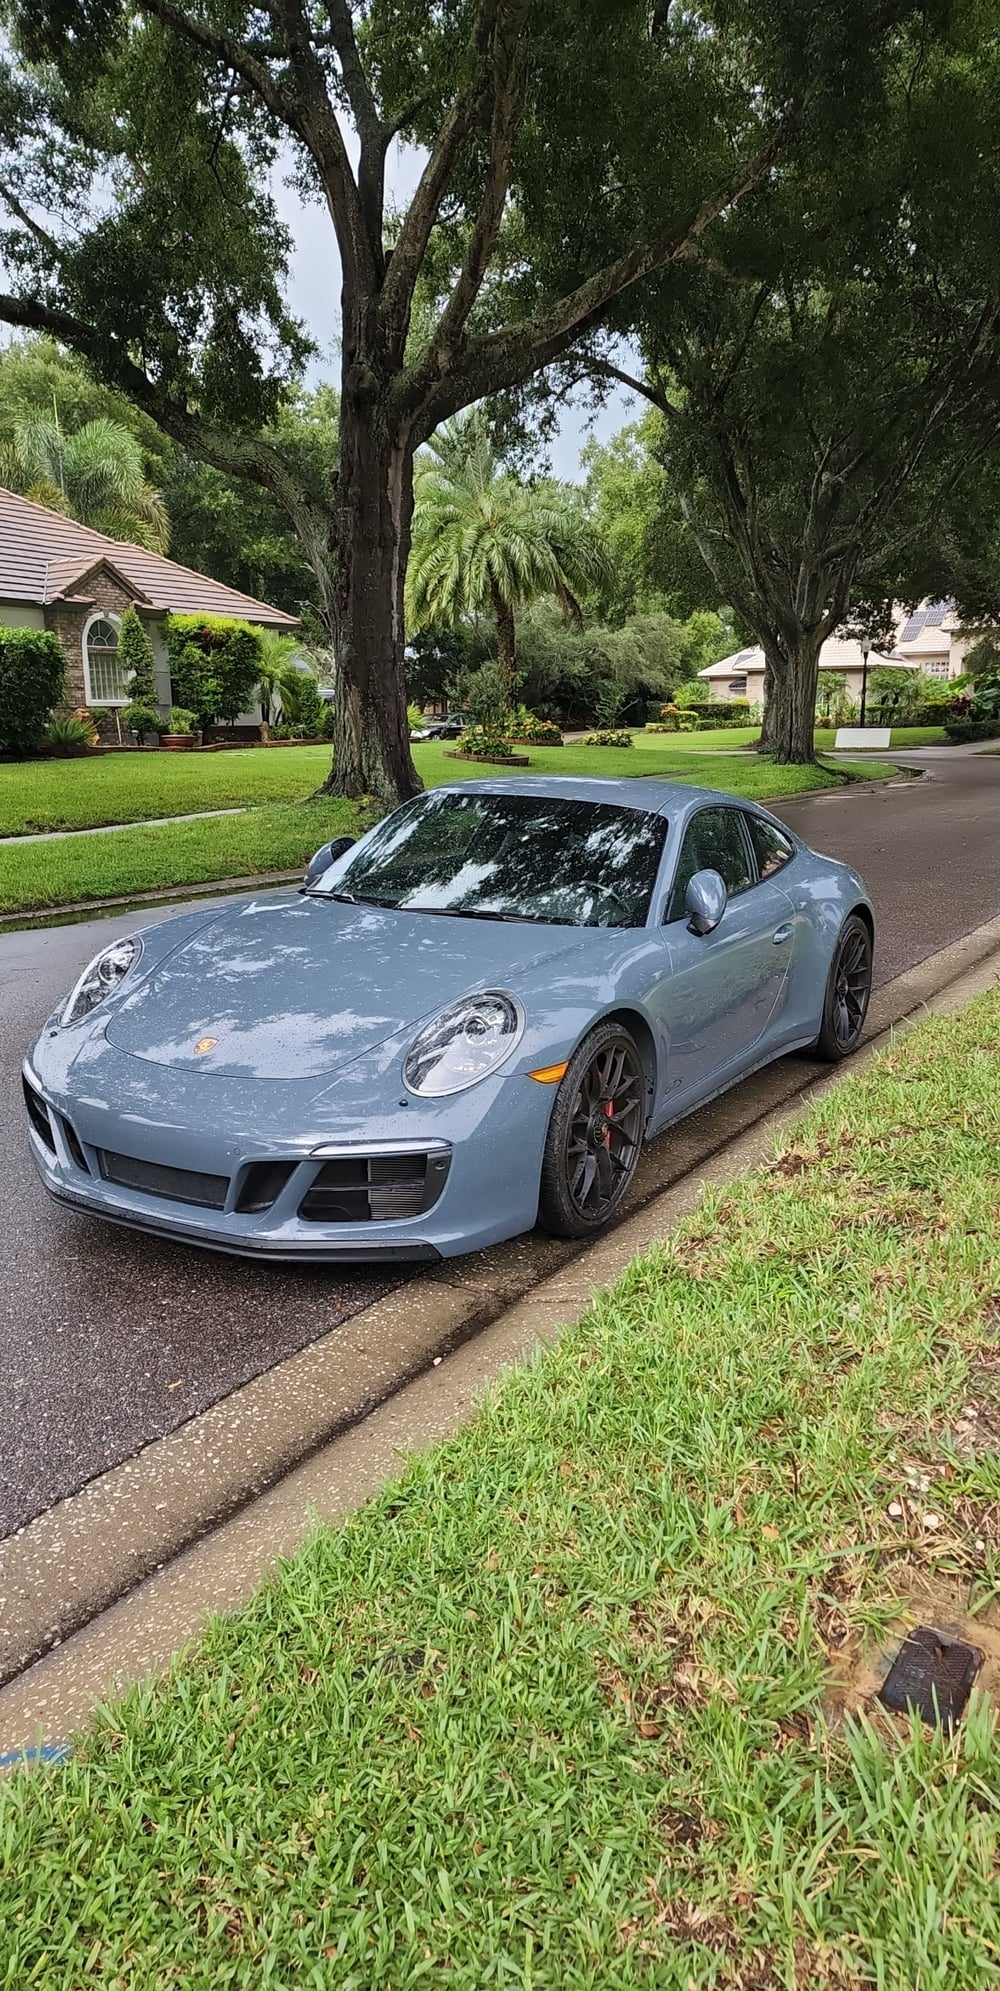 2017 Porsche 911 -  - Used - VIN WP0AB2A96HS124975 - 14,500 Miles - Automatic - Coupe - Blue - Orlando, FL 32836, United States